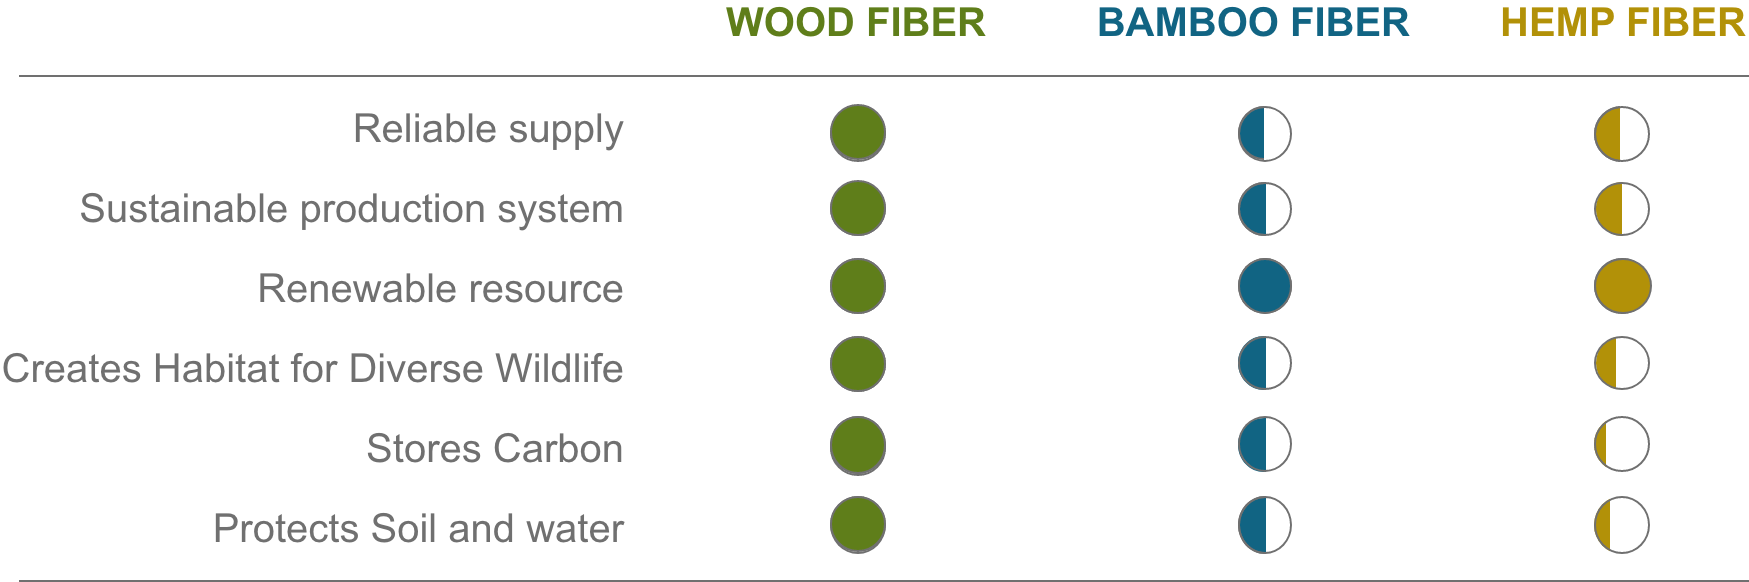 Comparison chart for hemp, bamboo and paper  